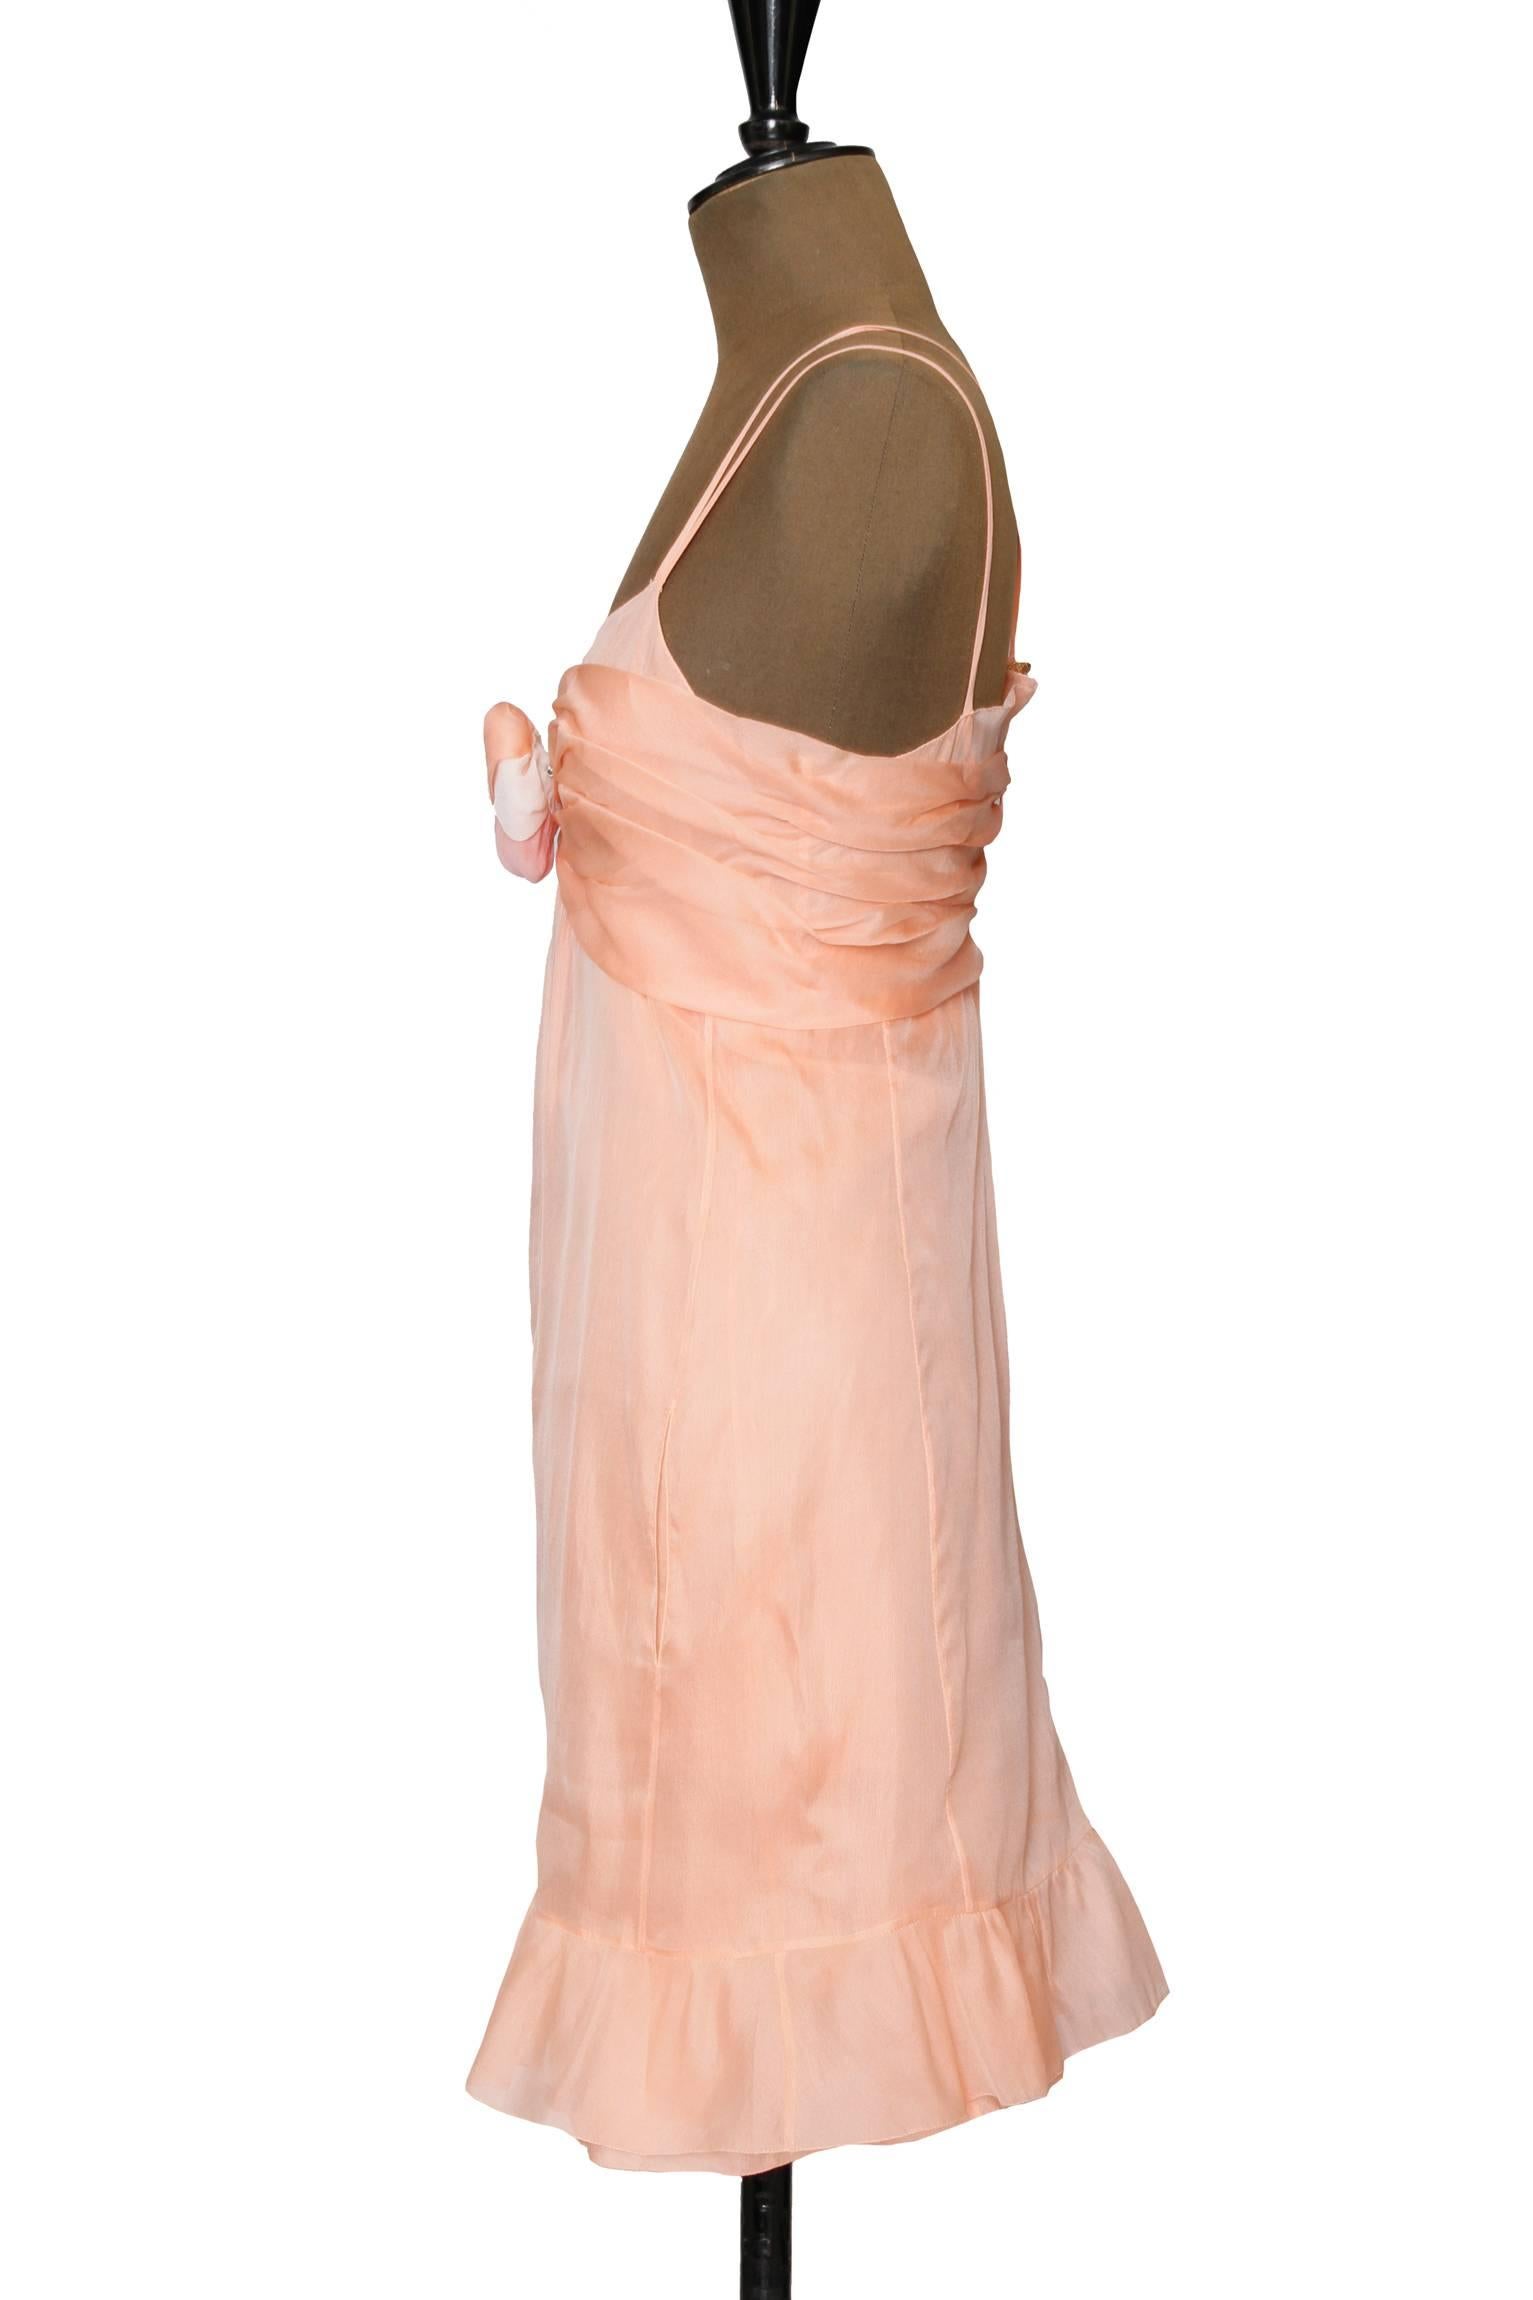 A delicate 1990s Chanel light pink negligee with a sheer overdress, a ruffle hemline and a ruched trim across the bust. In the center front, the dress has a detachable white & pink rose applique fastened with a safety pin. The dress is held up